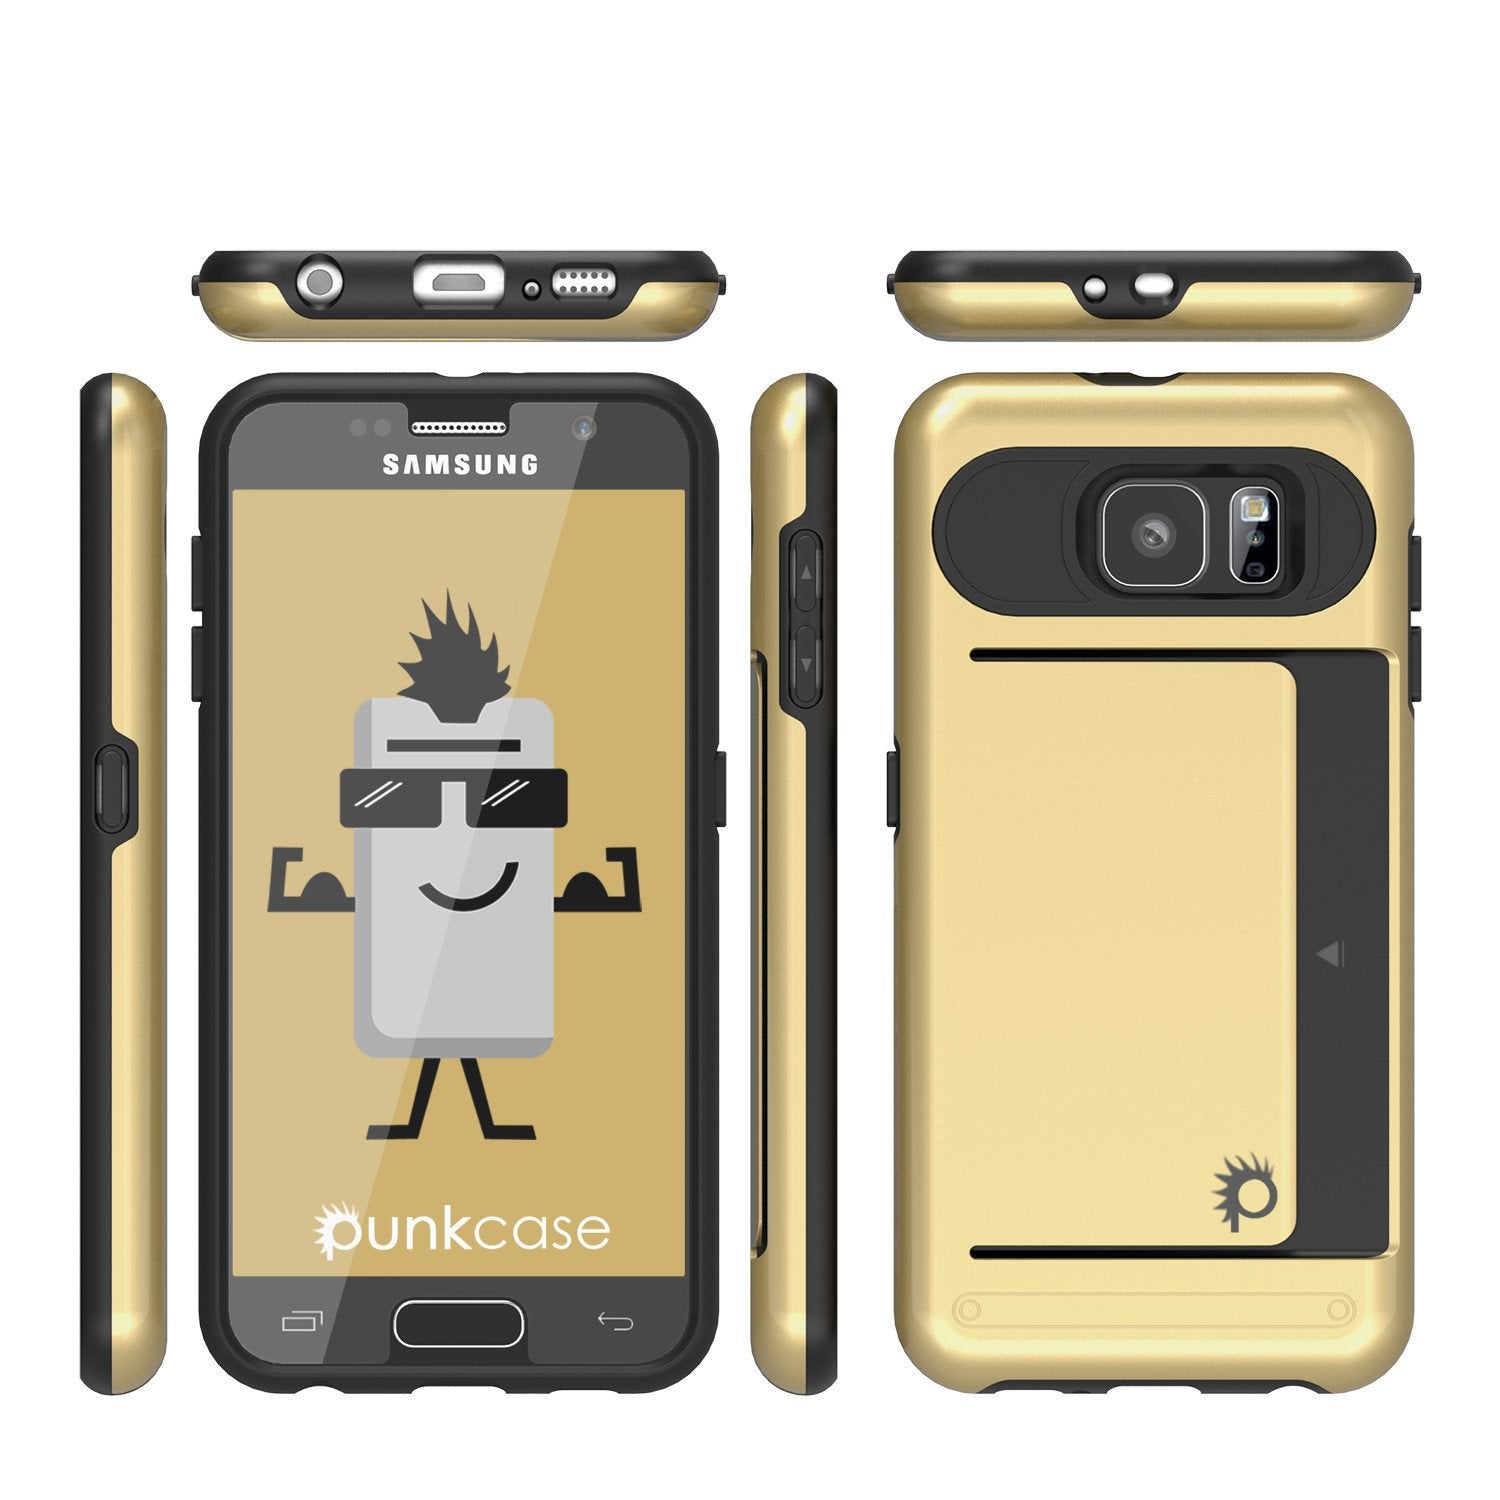 Galaxy S6 EDGE Case PunkCase CLUTCH Gold Series Slim Armor Soft Cover Case w/ Screen Protector - PunkCase NZ